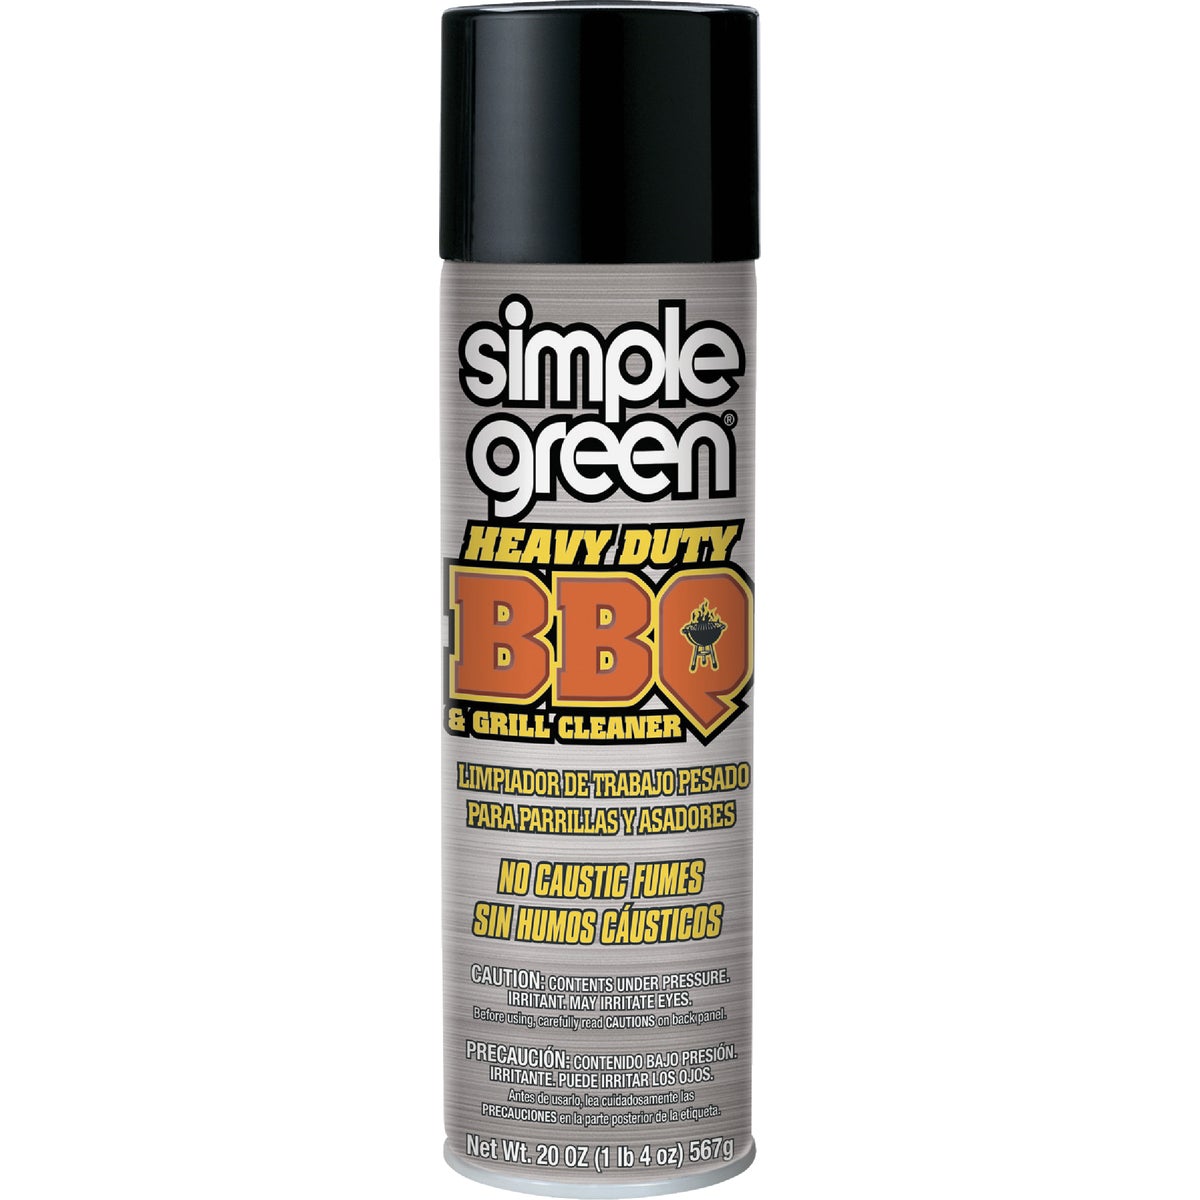 Item 640409, Simple Green Heavy-Duty BBQ and Grill Cleaner removes grease build-up, 